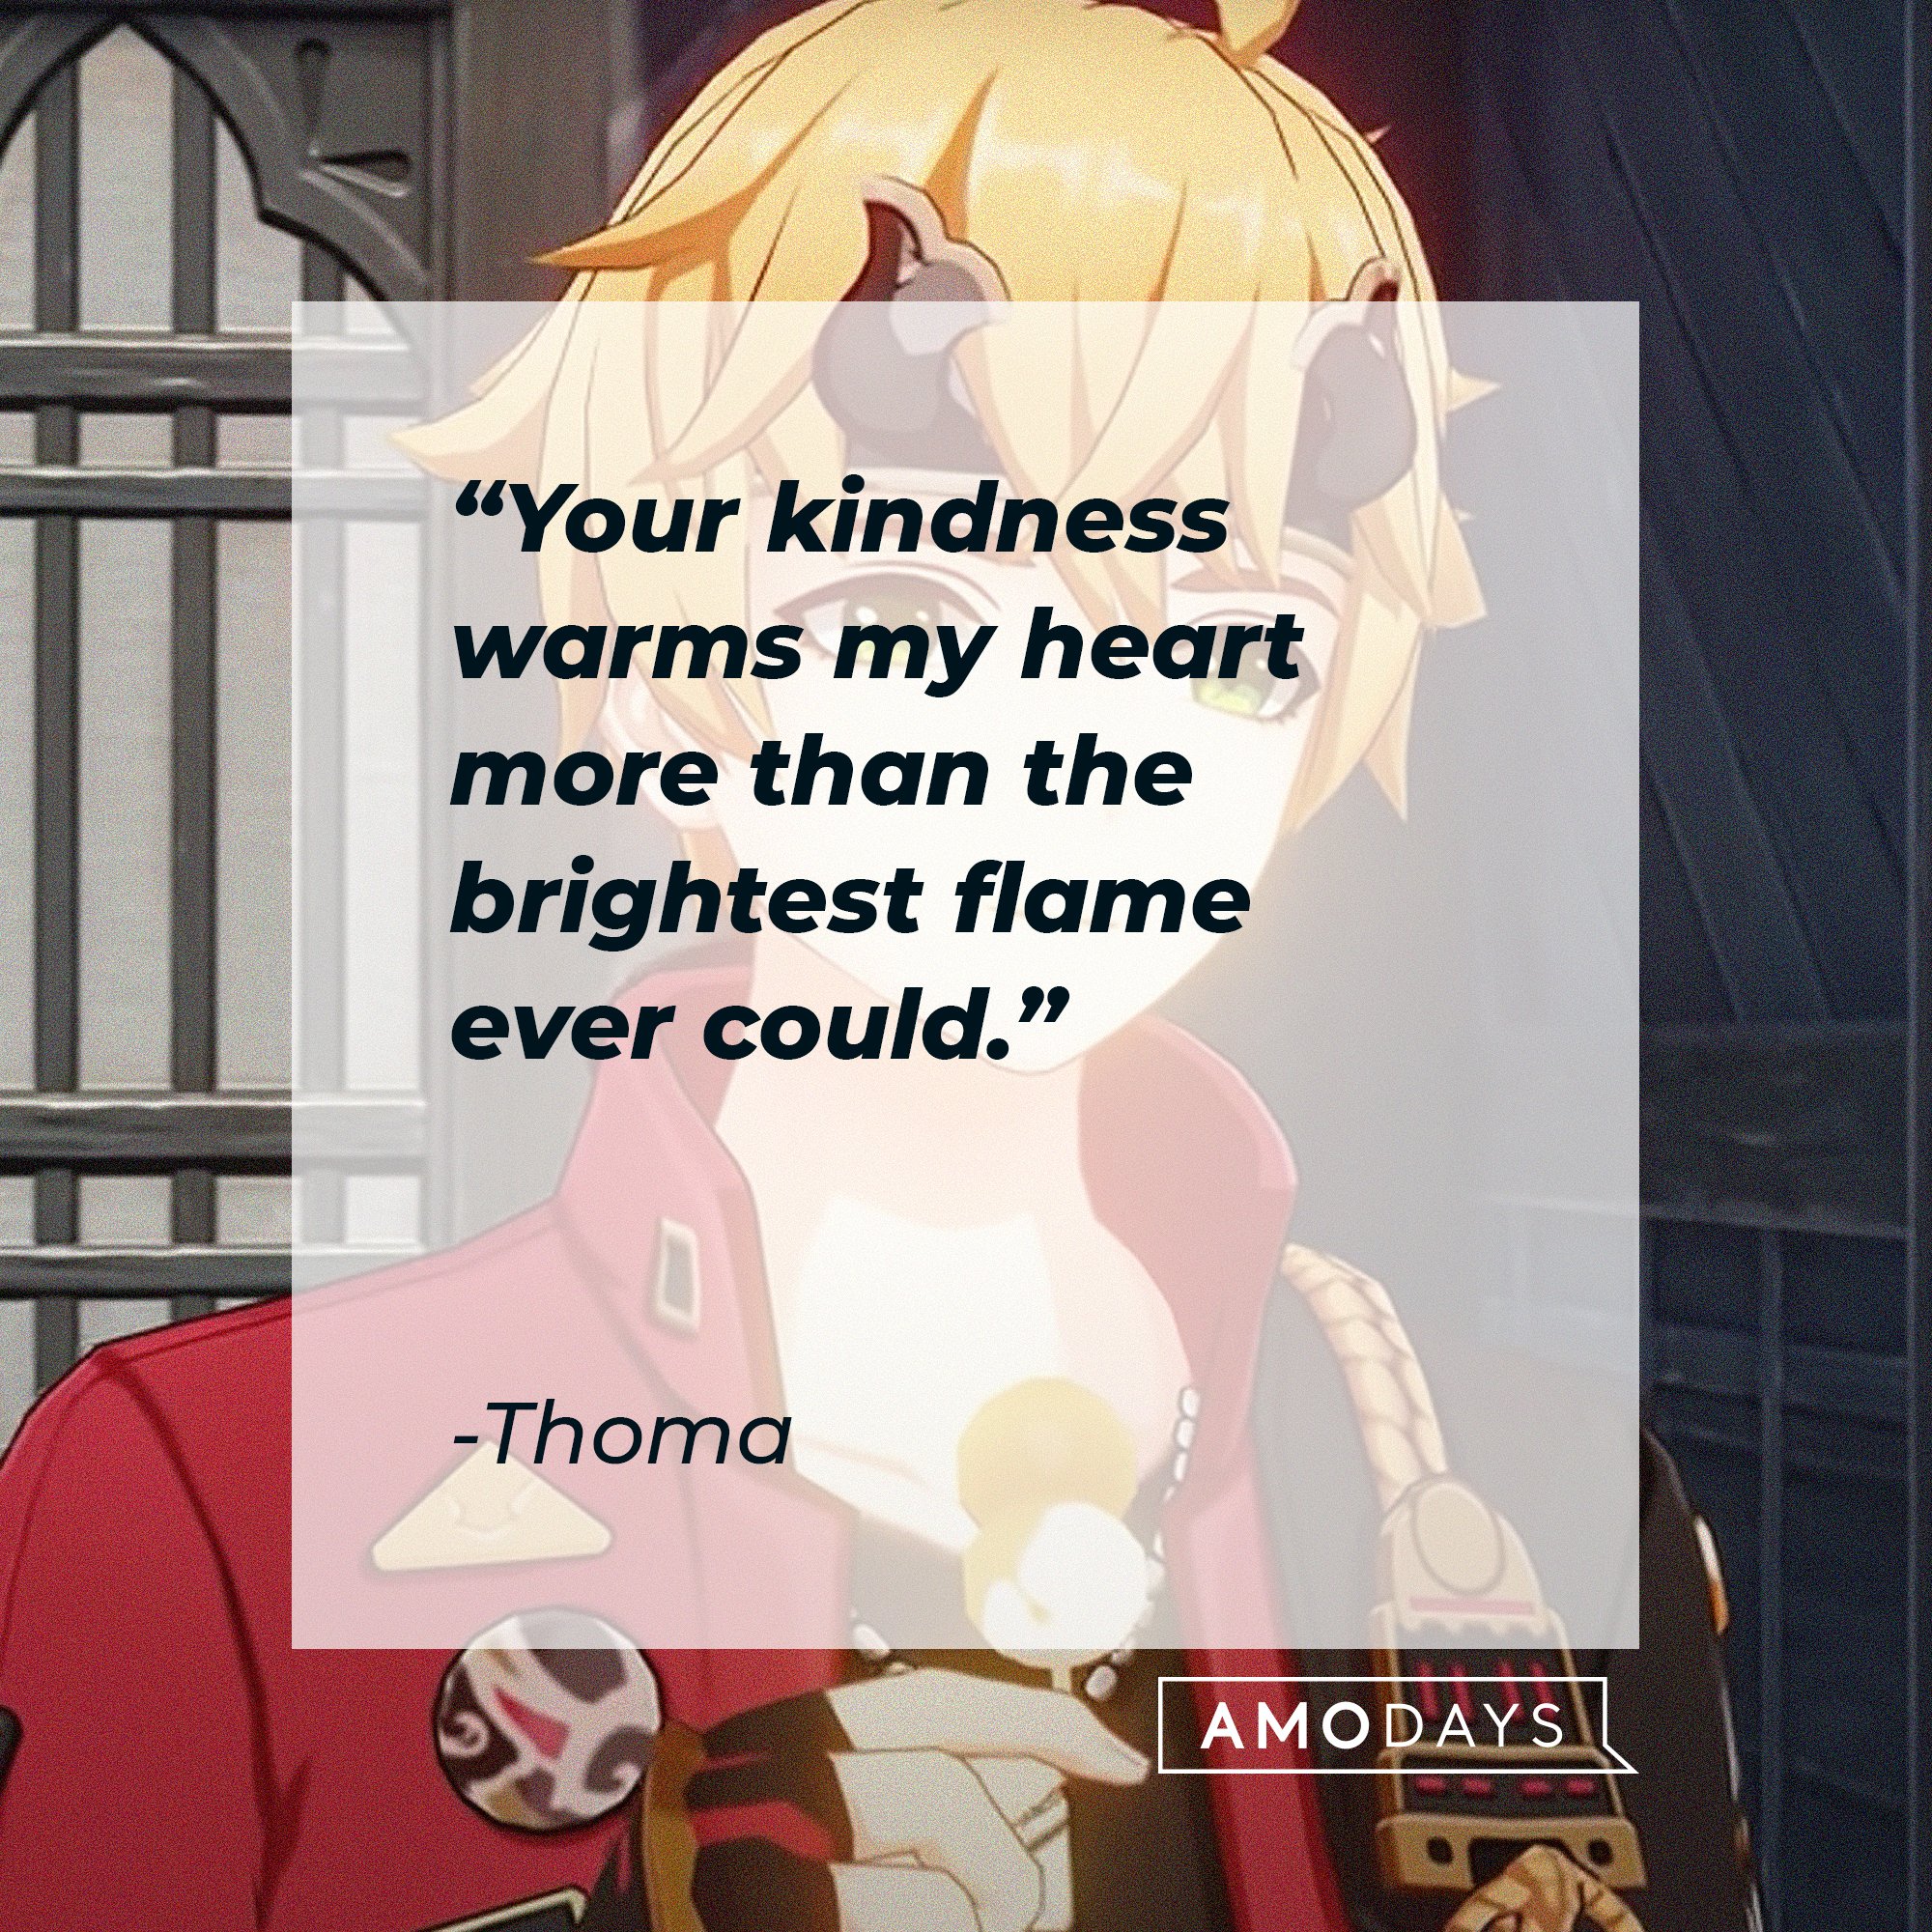 Thoma’s quote: "Your kindness warms my heart more than the brightest flame ever could." | Image: AmoDays